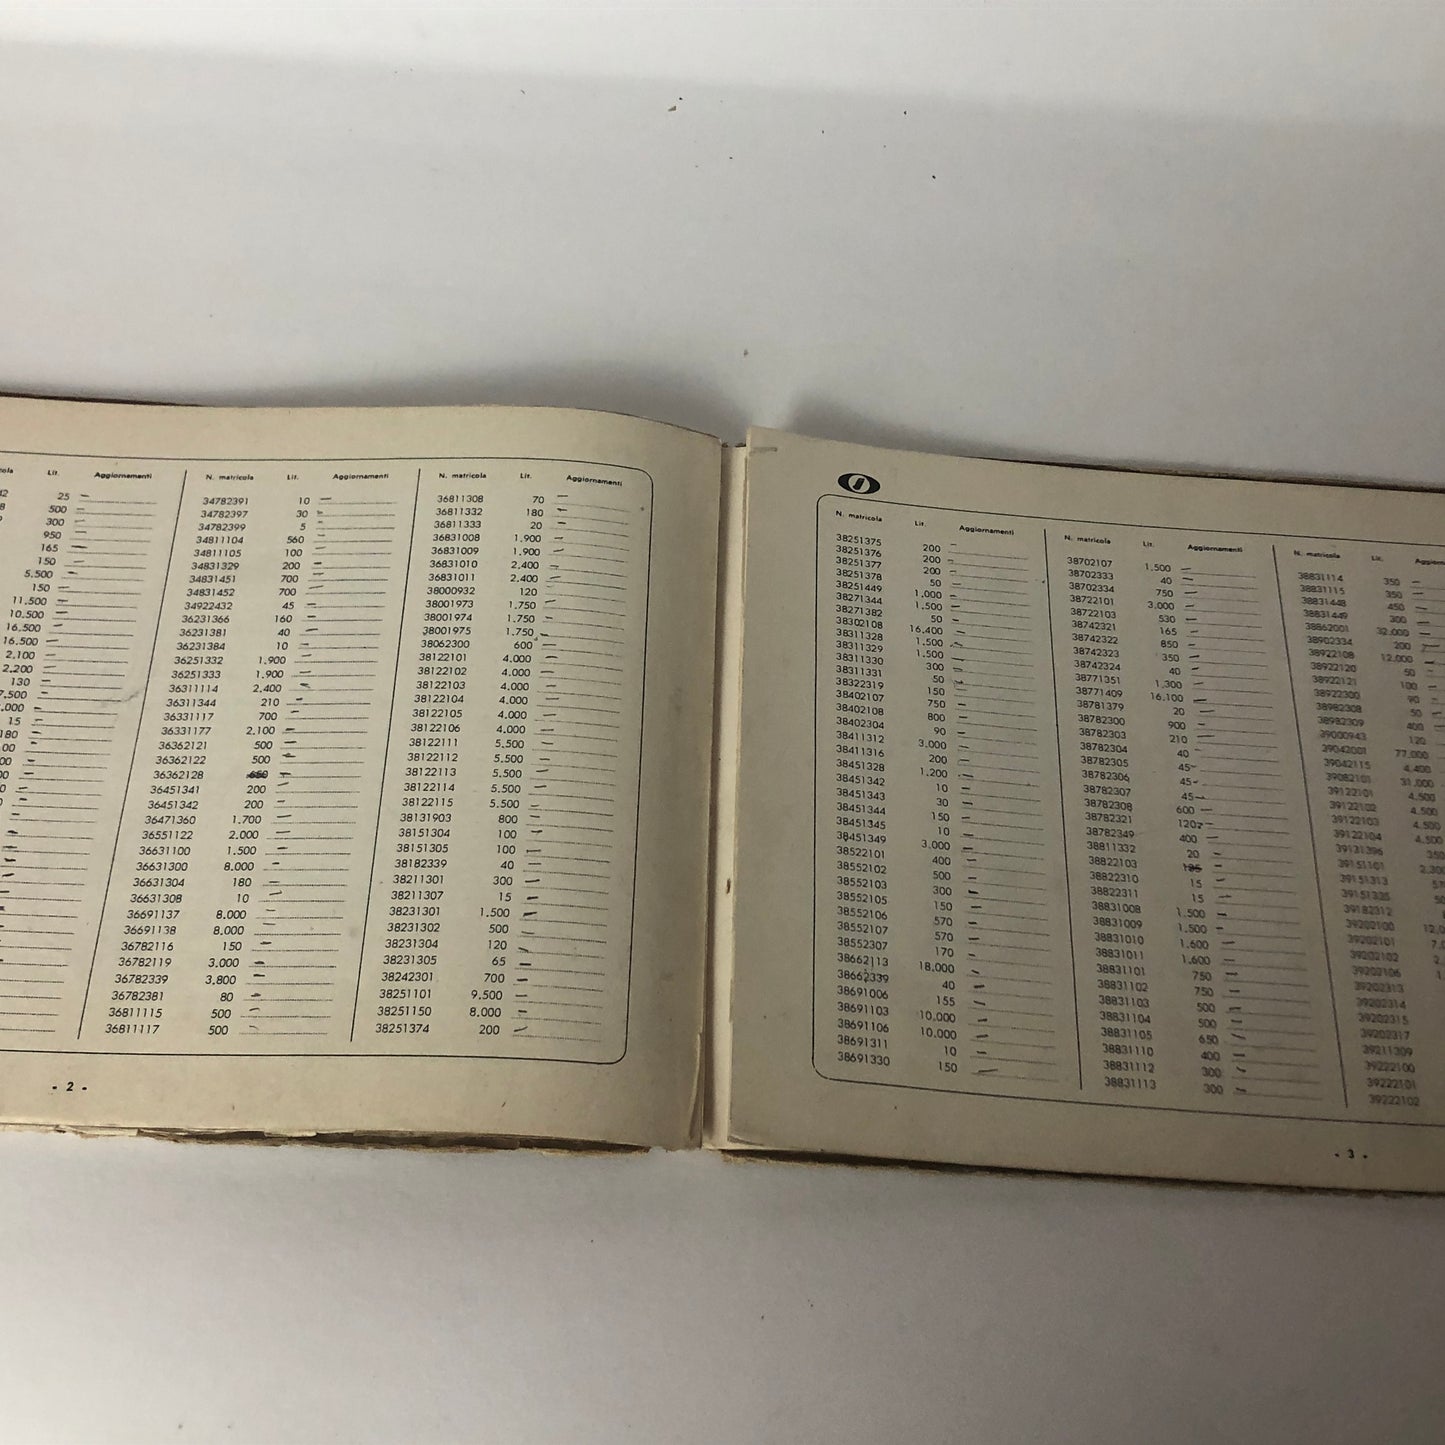 Innocenti, Price List of Spare Parts for Cars n. 6 Year 1966